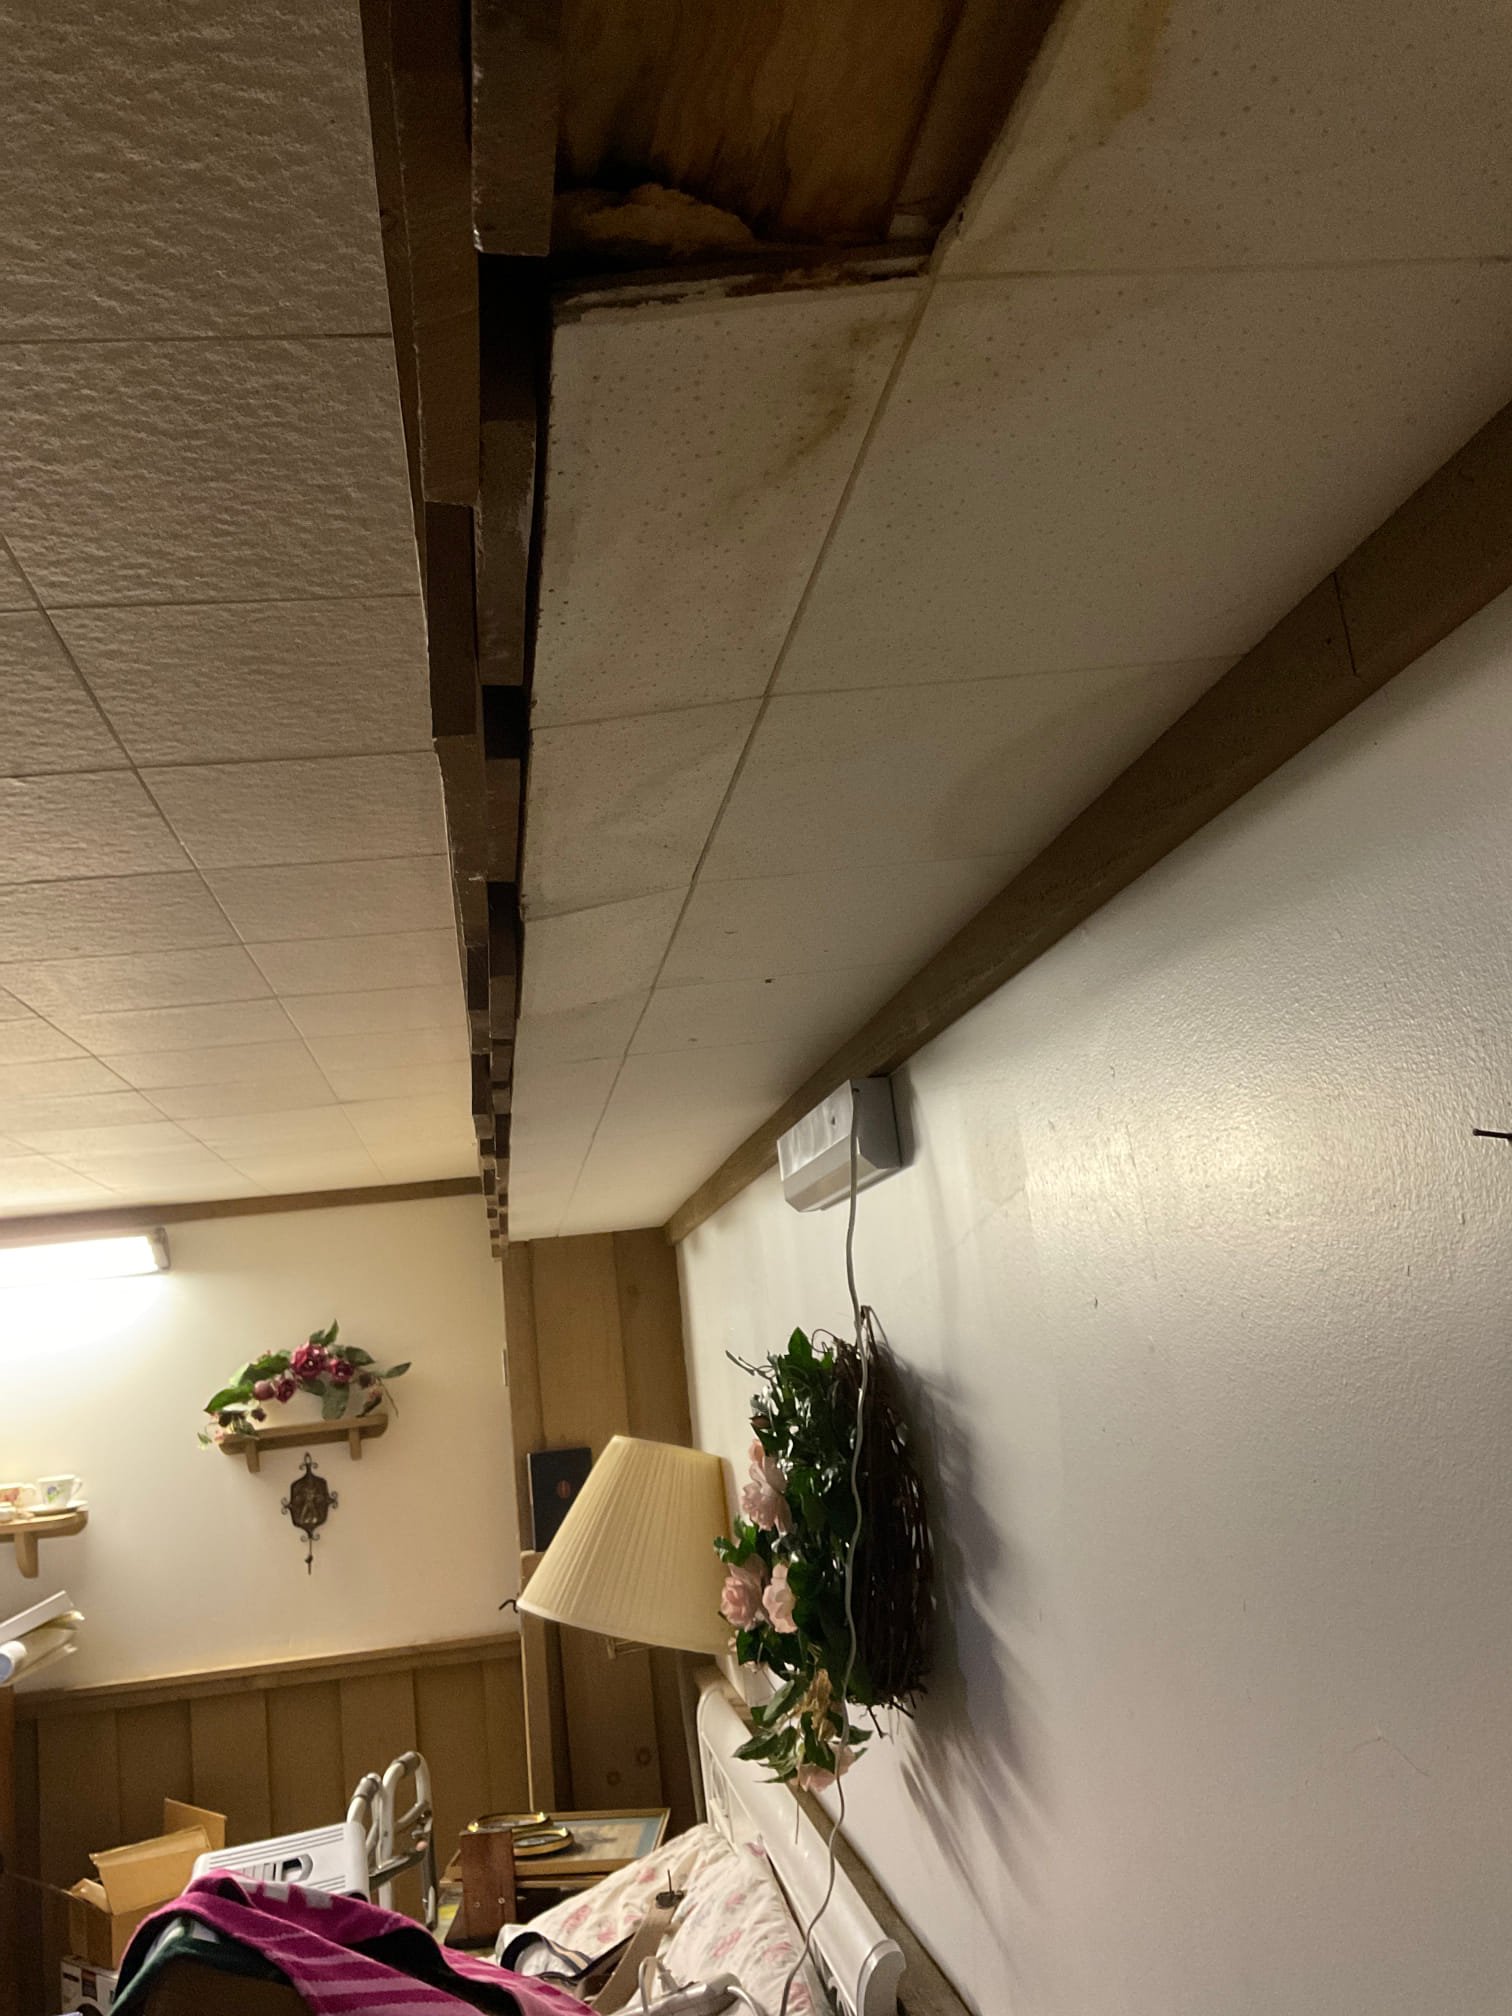 Wet basement ceiling from kitchen leak upstairs 